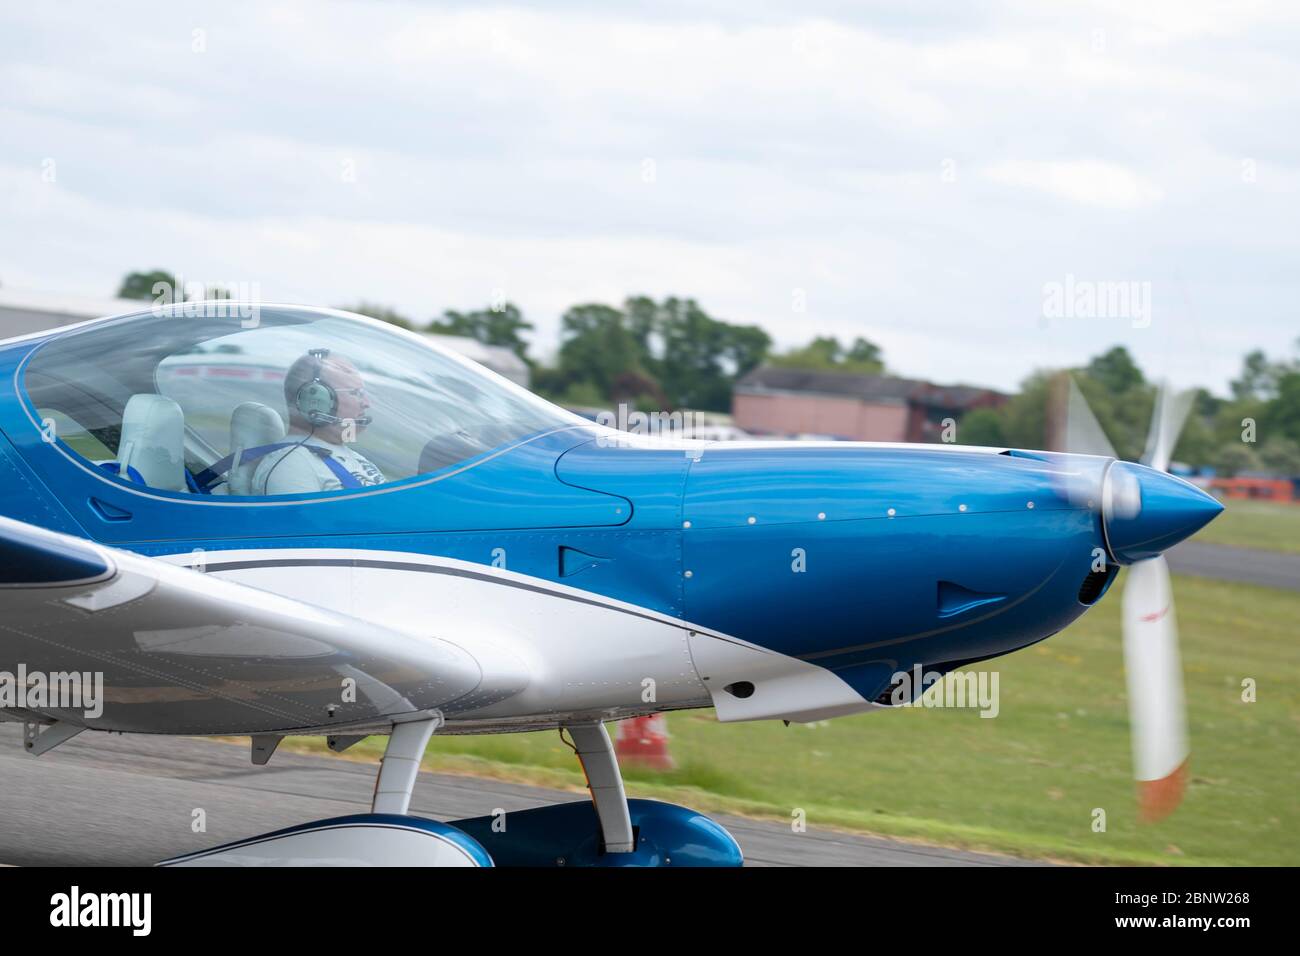 North Weald Essex UK 16th May 2020 General Aviation (Private and recreational flights) resume  in England, North Weald Airfield reopens after the lockdown for civil and private flying subject to strict social distancing guidelines Bristell NG5 Speed Wing  Credit Ian DavidsonAlamy Live News Stock Photo